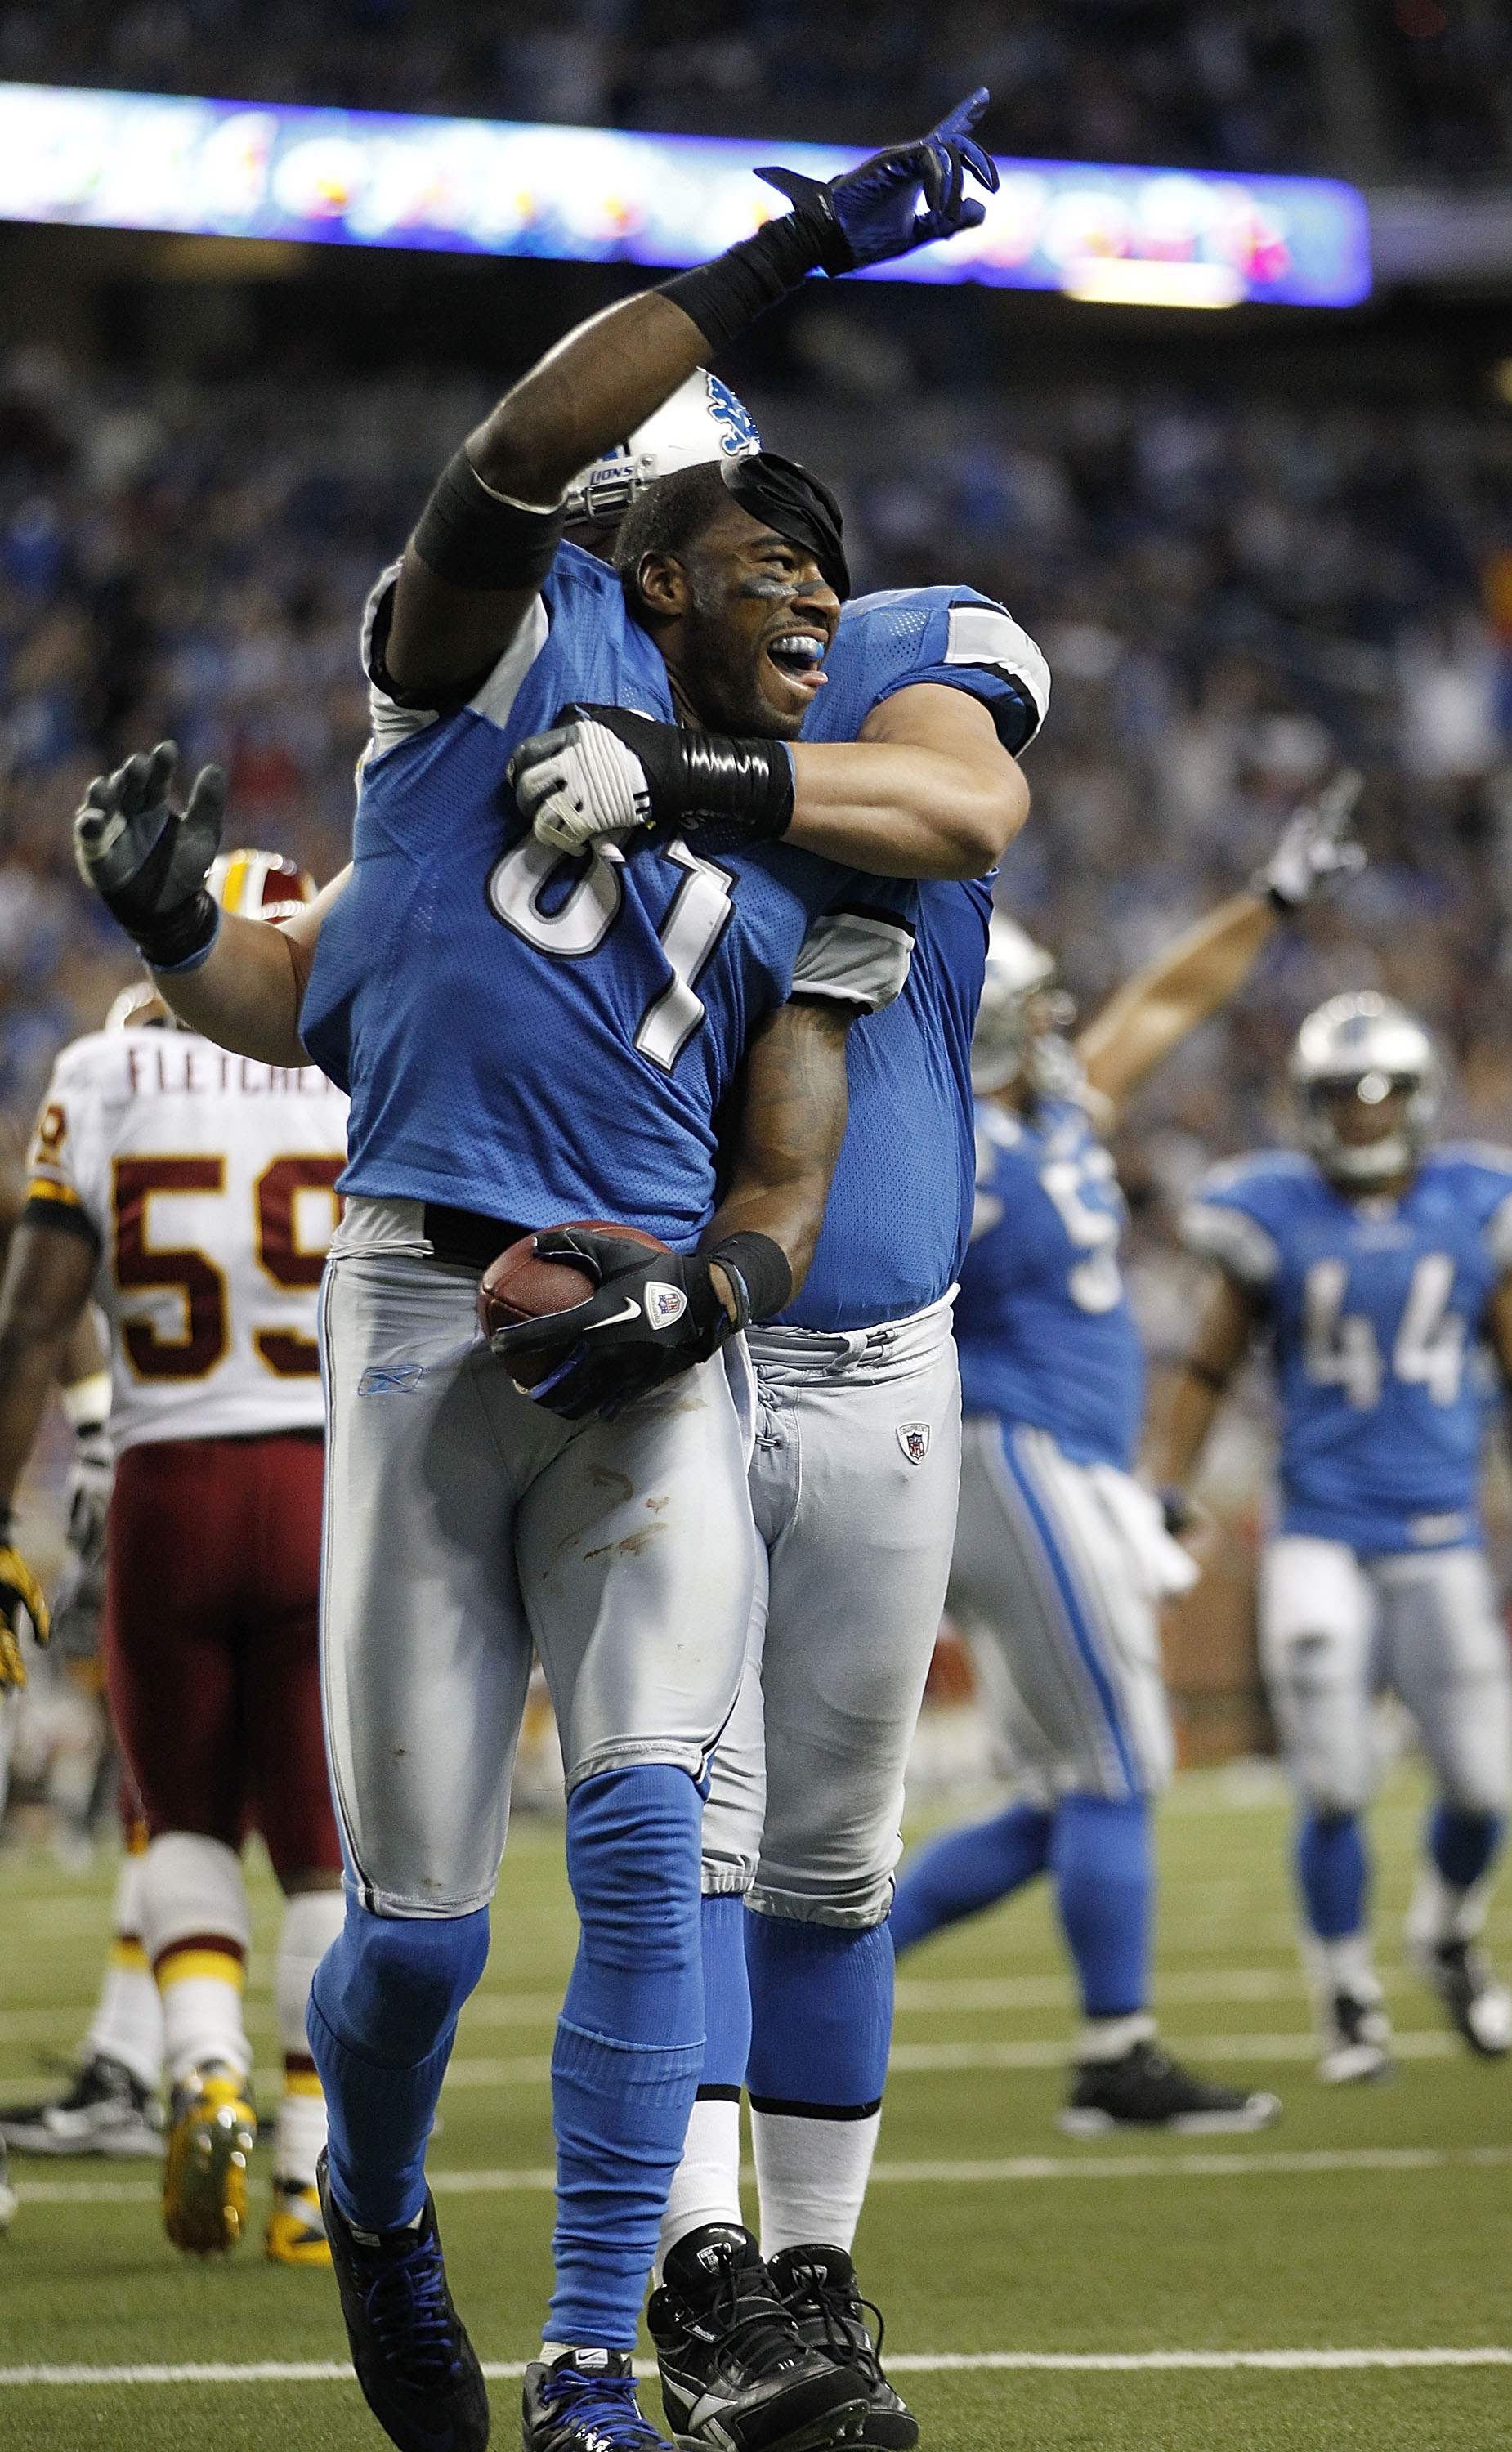 DETROIT - OCTOBER 31: Calvin Johnson #81 of the Detroit Lions celebrates with teammate Jeff Backus #76 after scoring a touchdown during the fourth quarter of the game against the Washington Redskins at Ford Field on October 31, 2010 in Detroit, Michigan. 